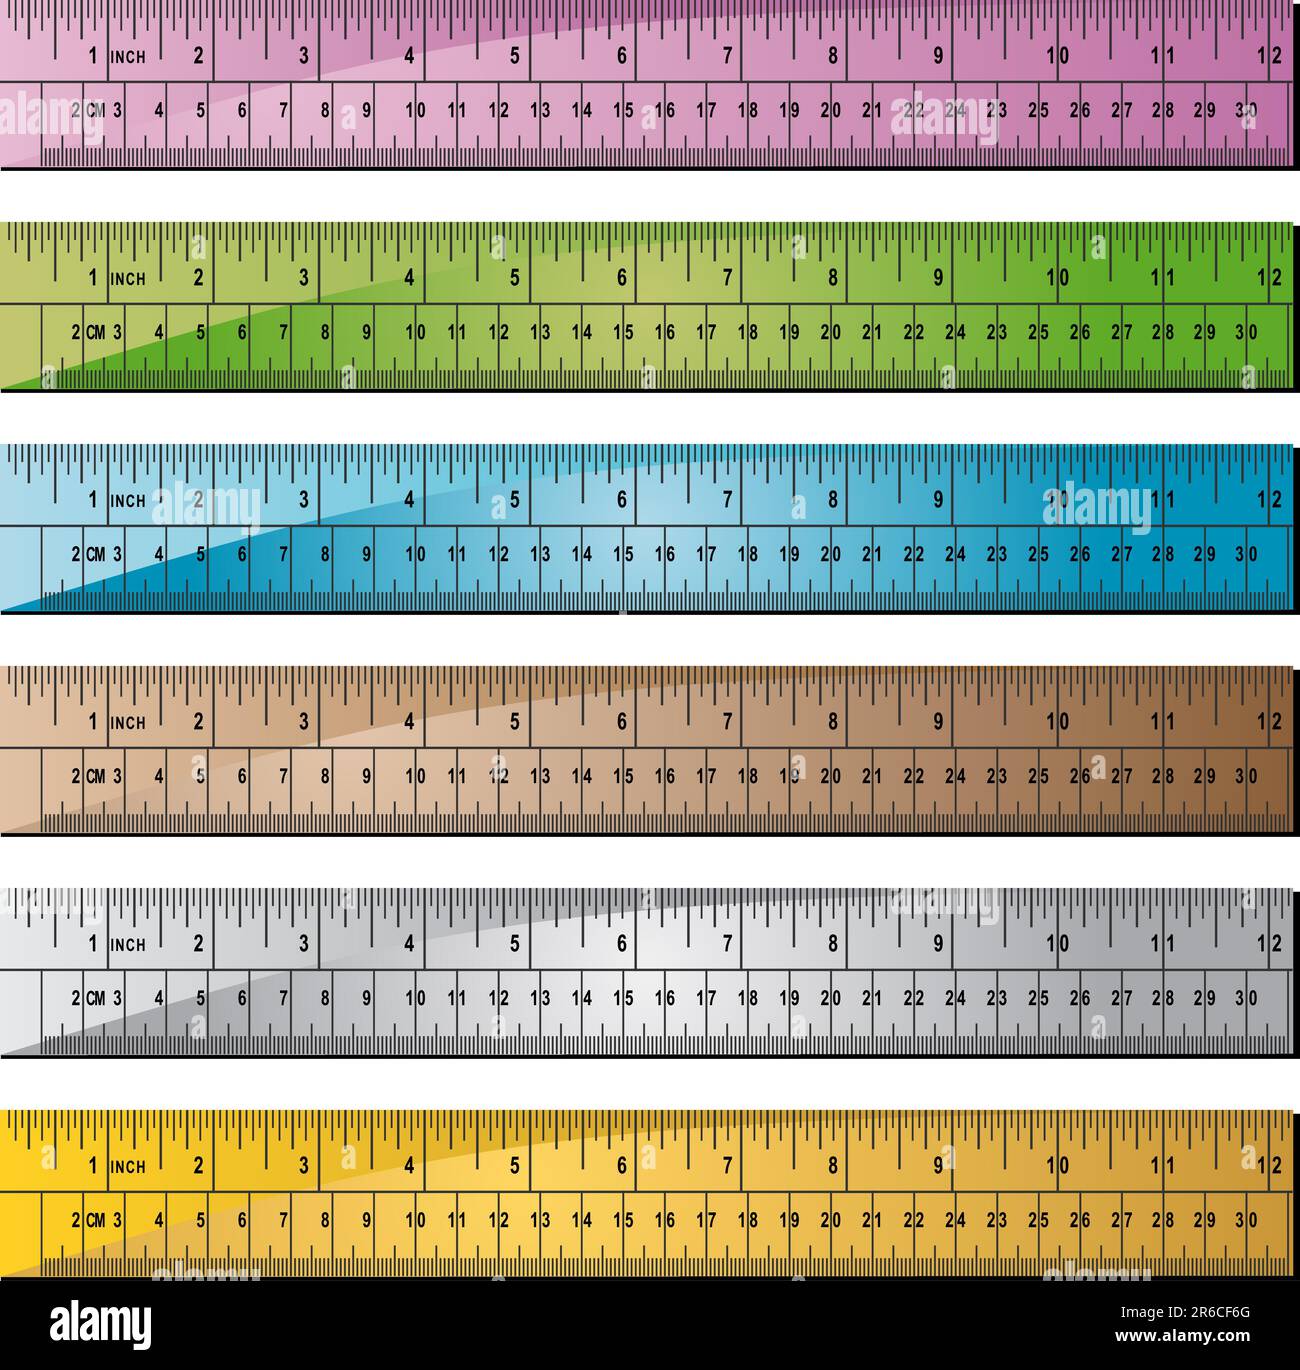 Wooden Rule 1 Meter Yard Stick Ruler Imperial & Metric mm cm inches With  Handle